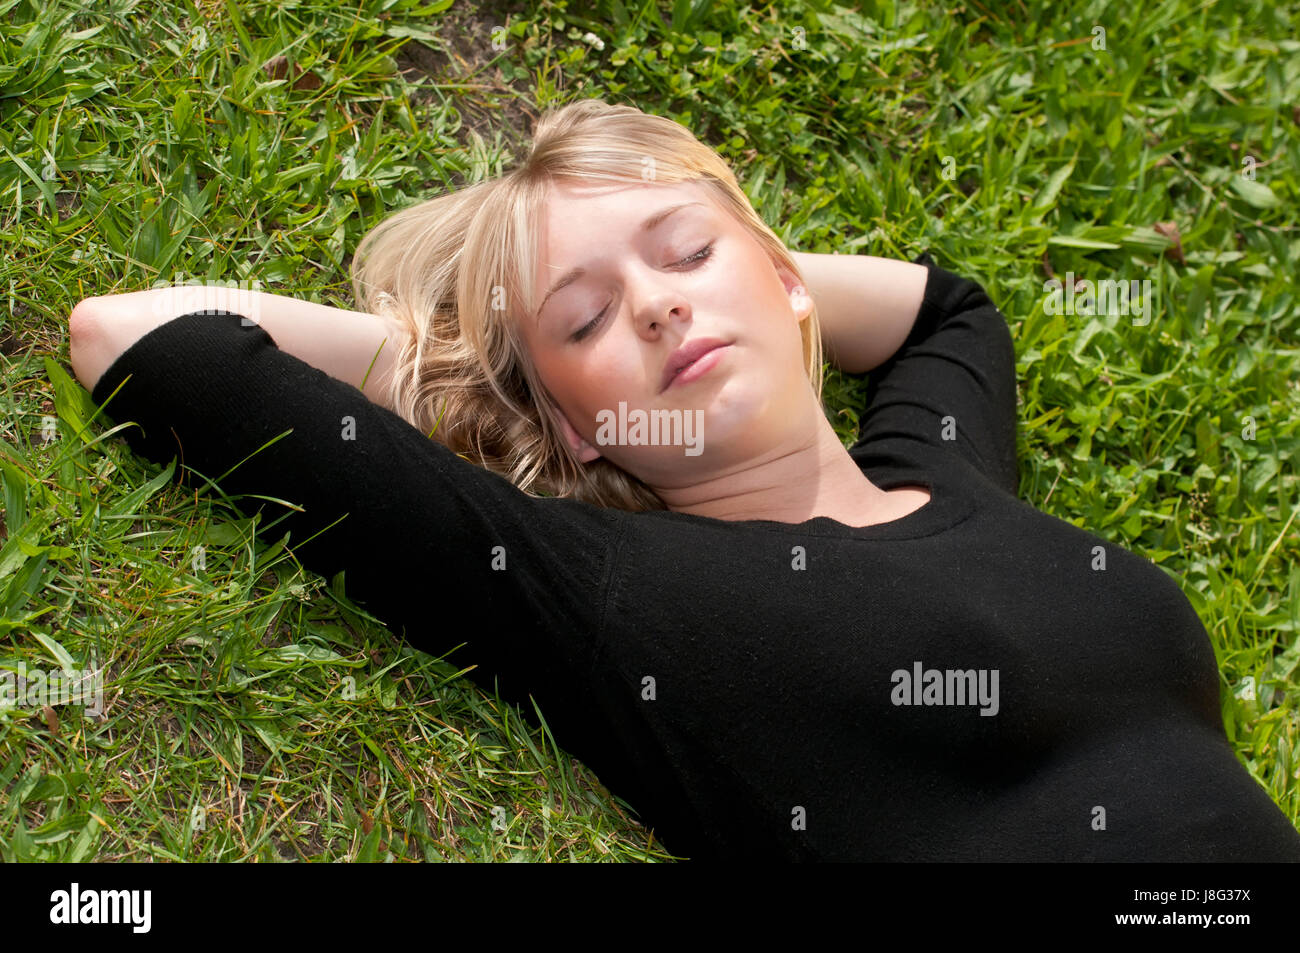 young woman lying on a lawn Stock Photo